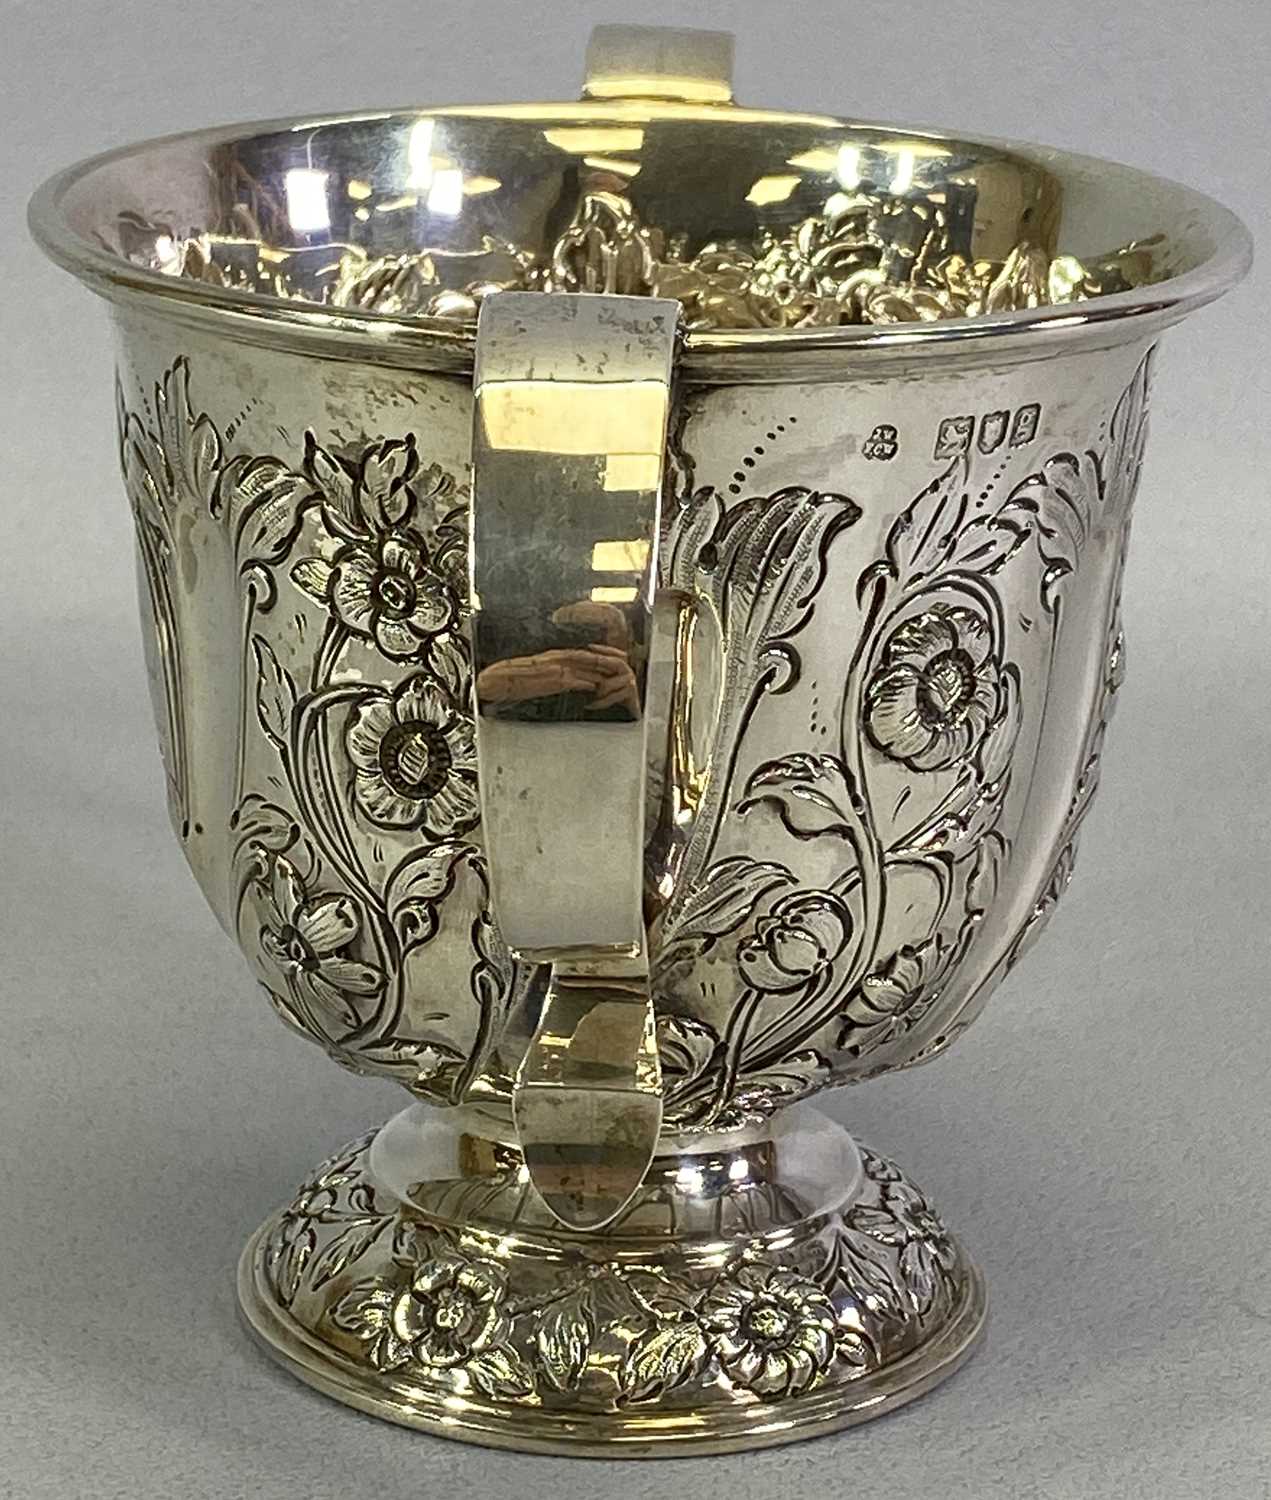 EDWARD VII SILVER TWO-HANDLED PEDESTAL CUP - London 1902, Maker Wakely & Wheeler, 11.75cms max H, - Image 4 of 5